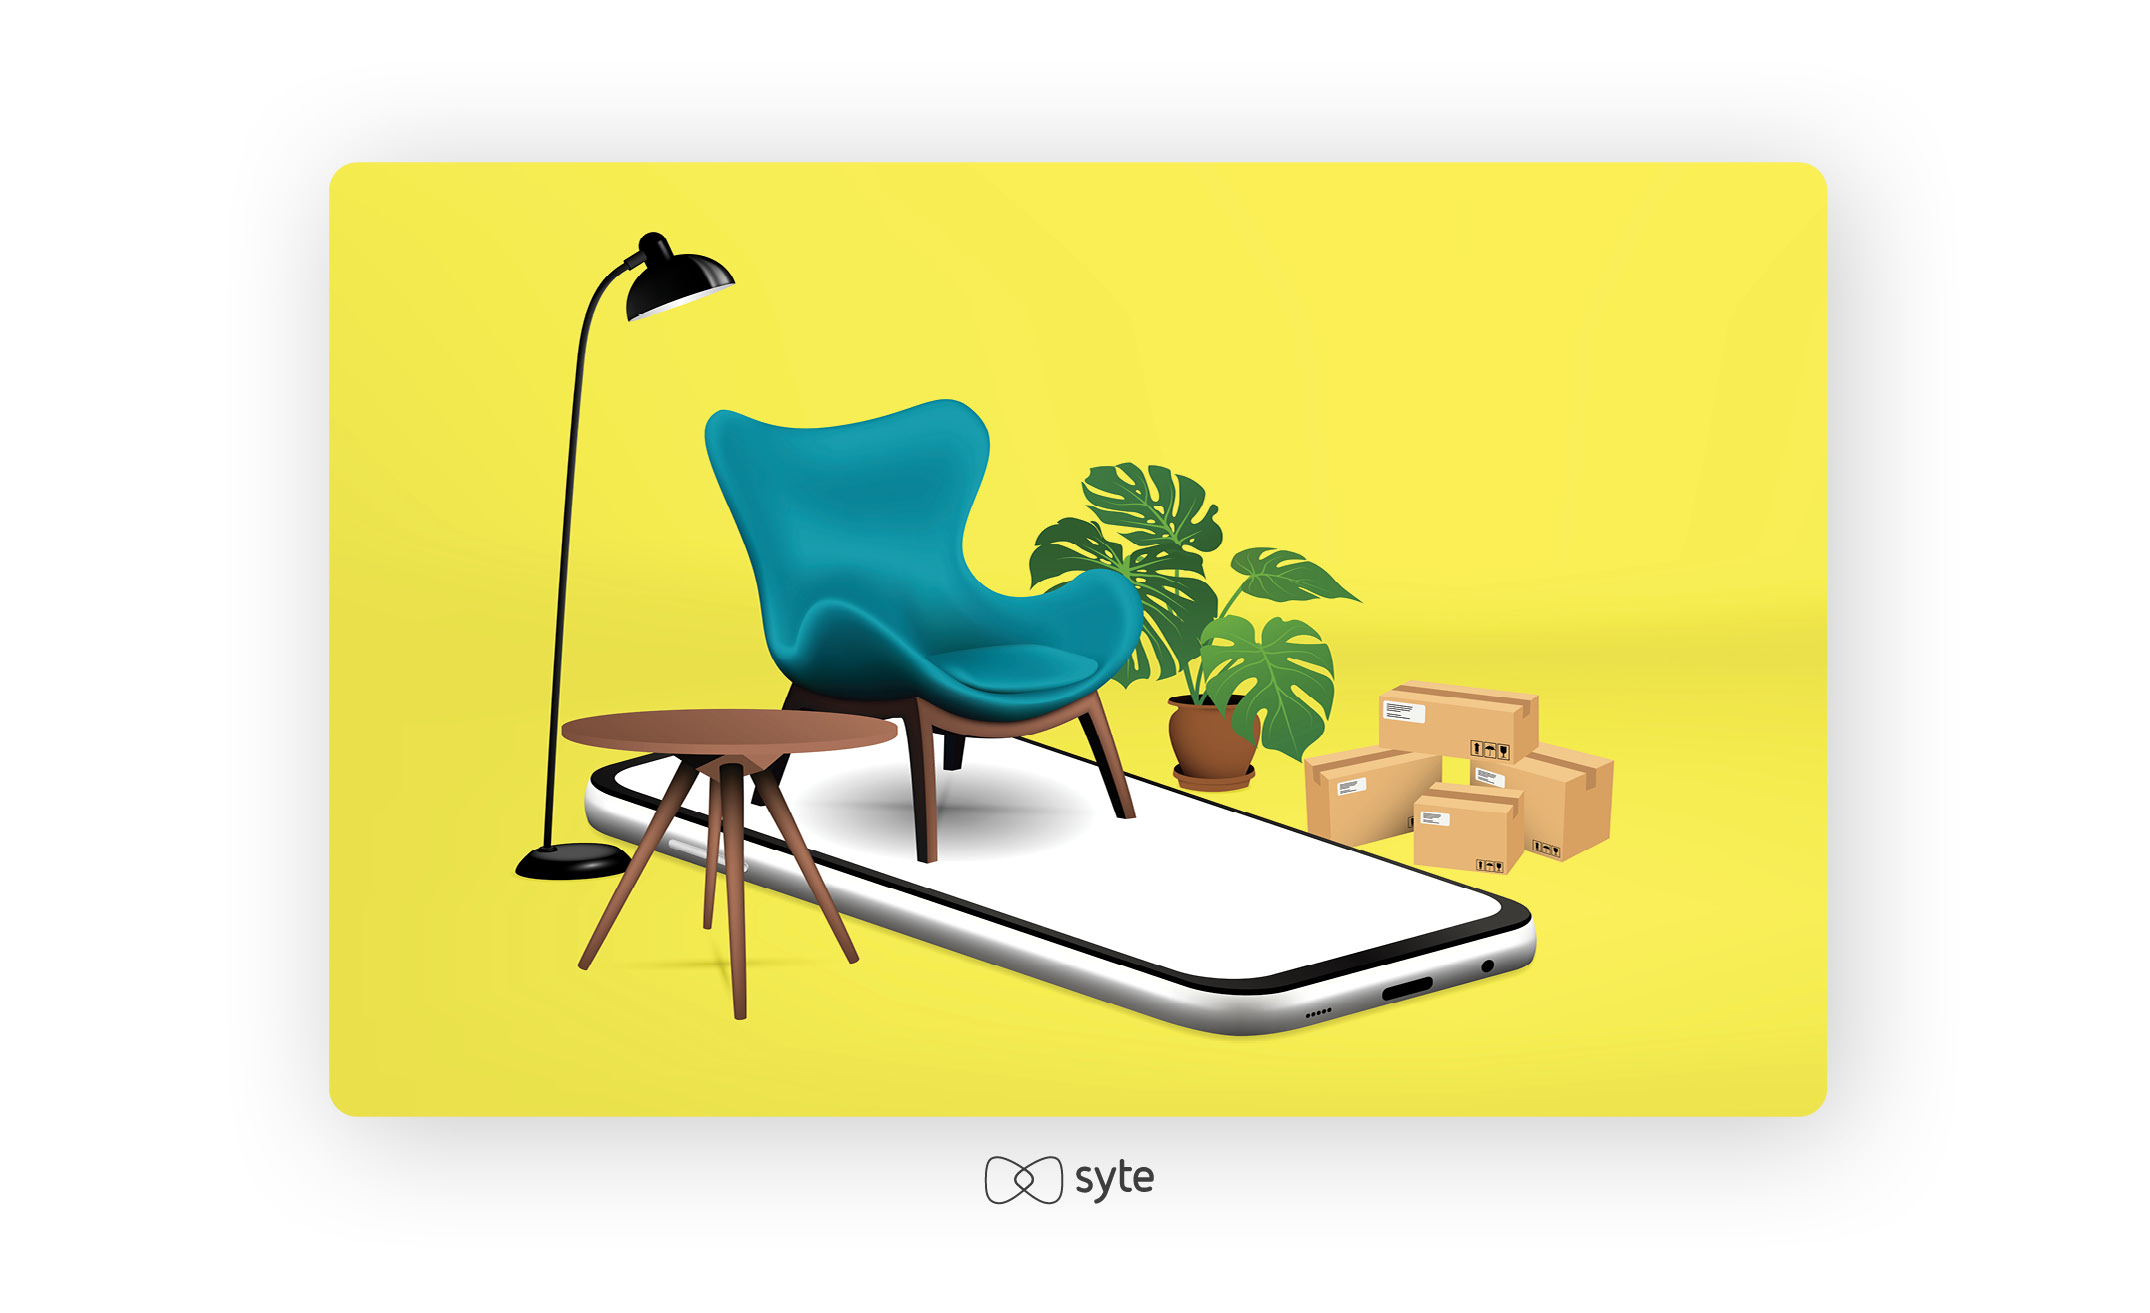 Home furnishings styled on top of a giant mobile phone against a yellow background 